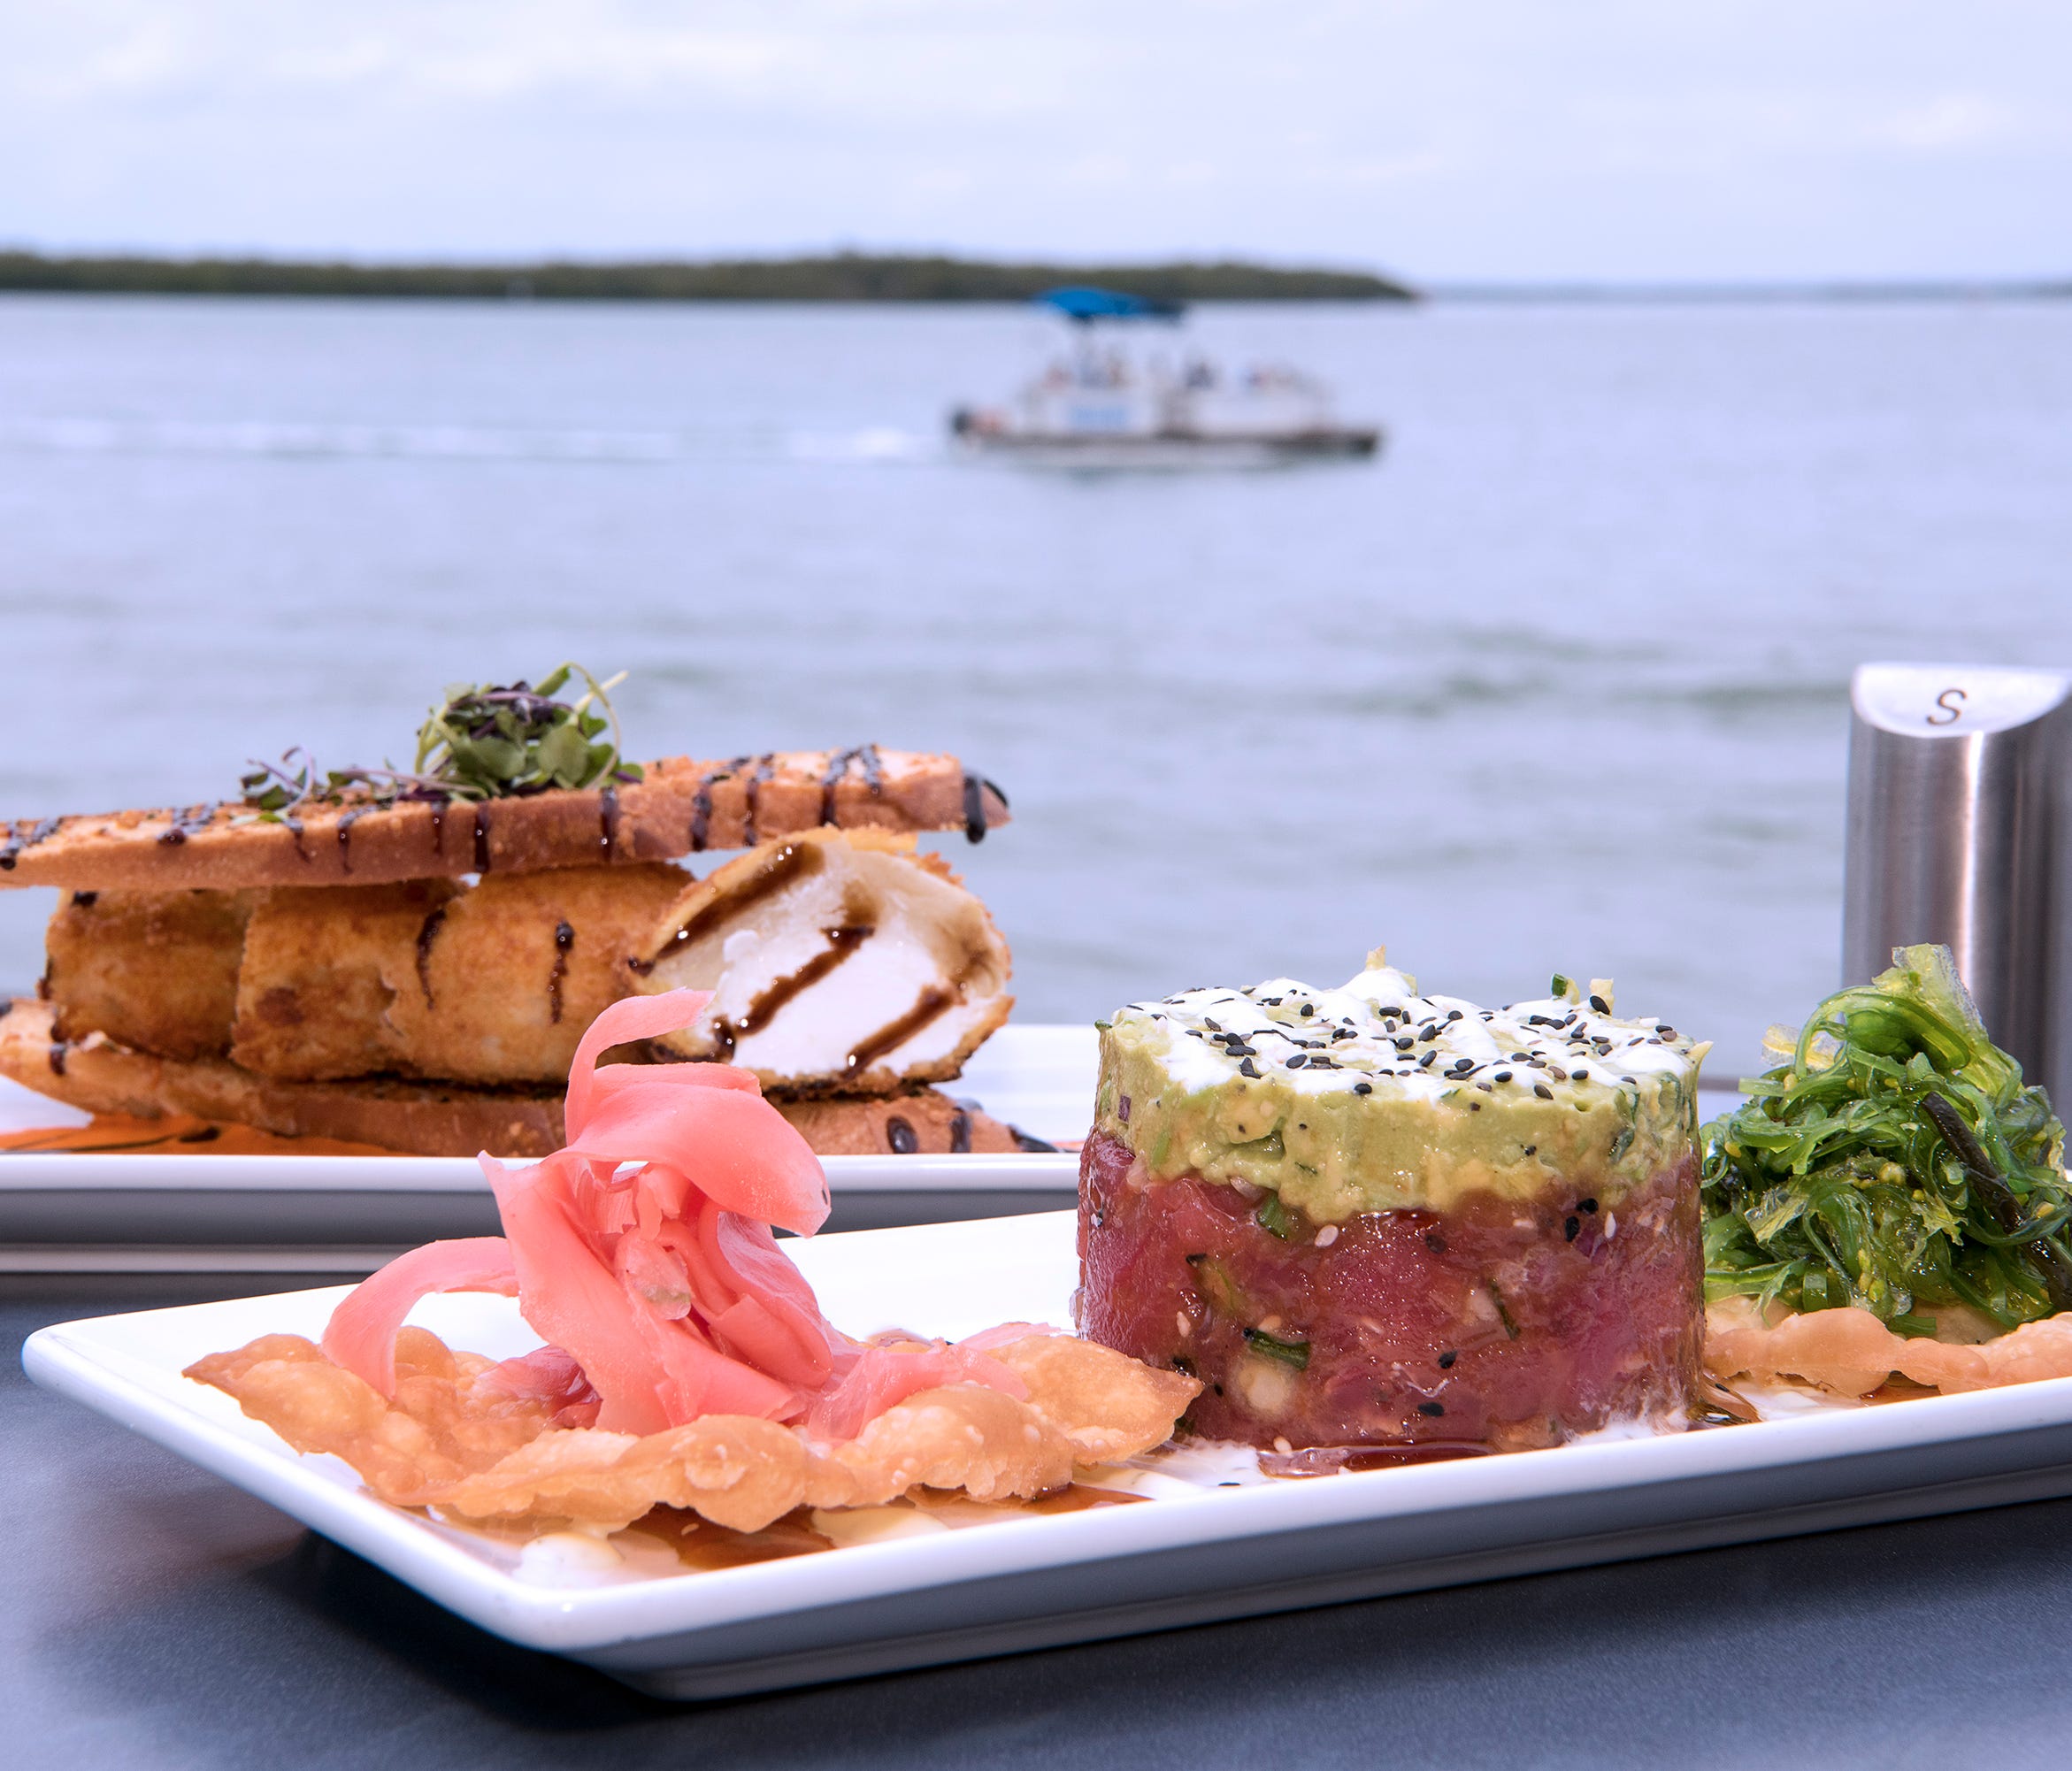 Flipper's on the Bay, in Fort Myers Beach, combines great food with eye-catching scenery overlooking Estero Bay at Lovers Key Resort. Well-executed dishes include tuna ceviche with pickled ginger, cucumber and avocado relish, as well as stuffed artic